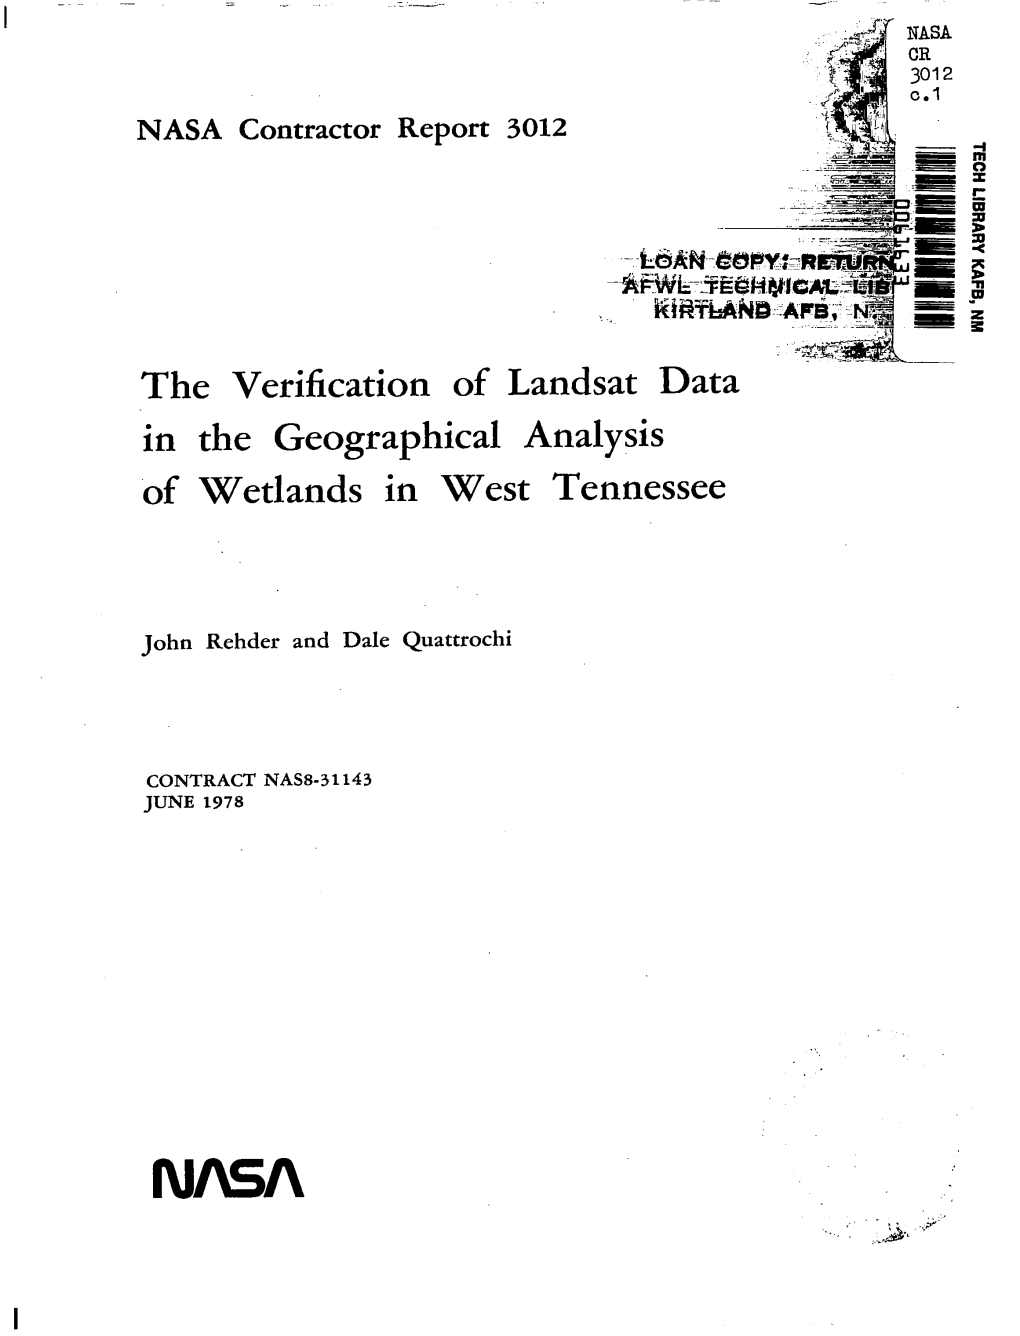 The Verification of Landsat Data in the Geographical Analysis Wetlands in West Tennessee